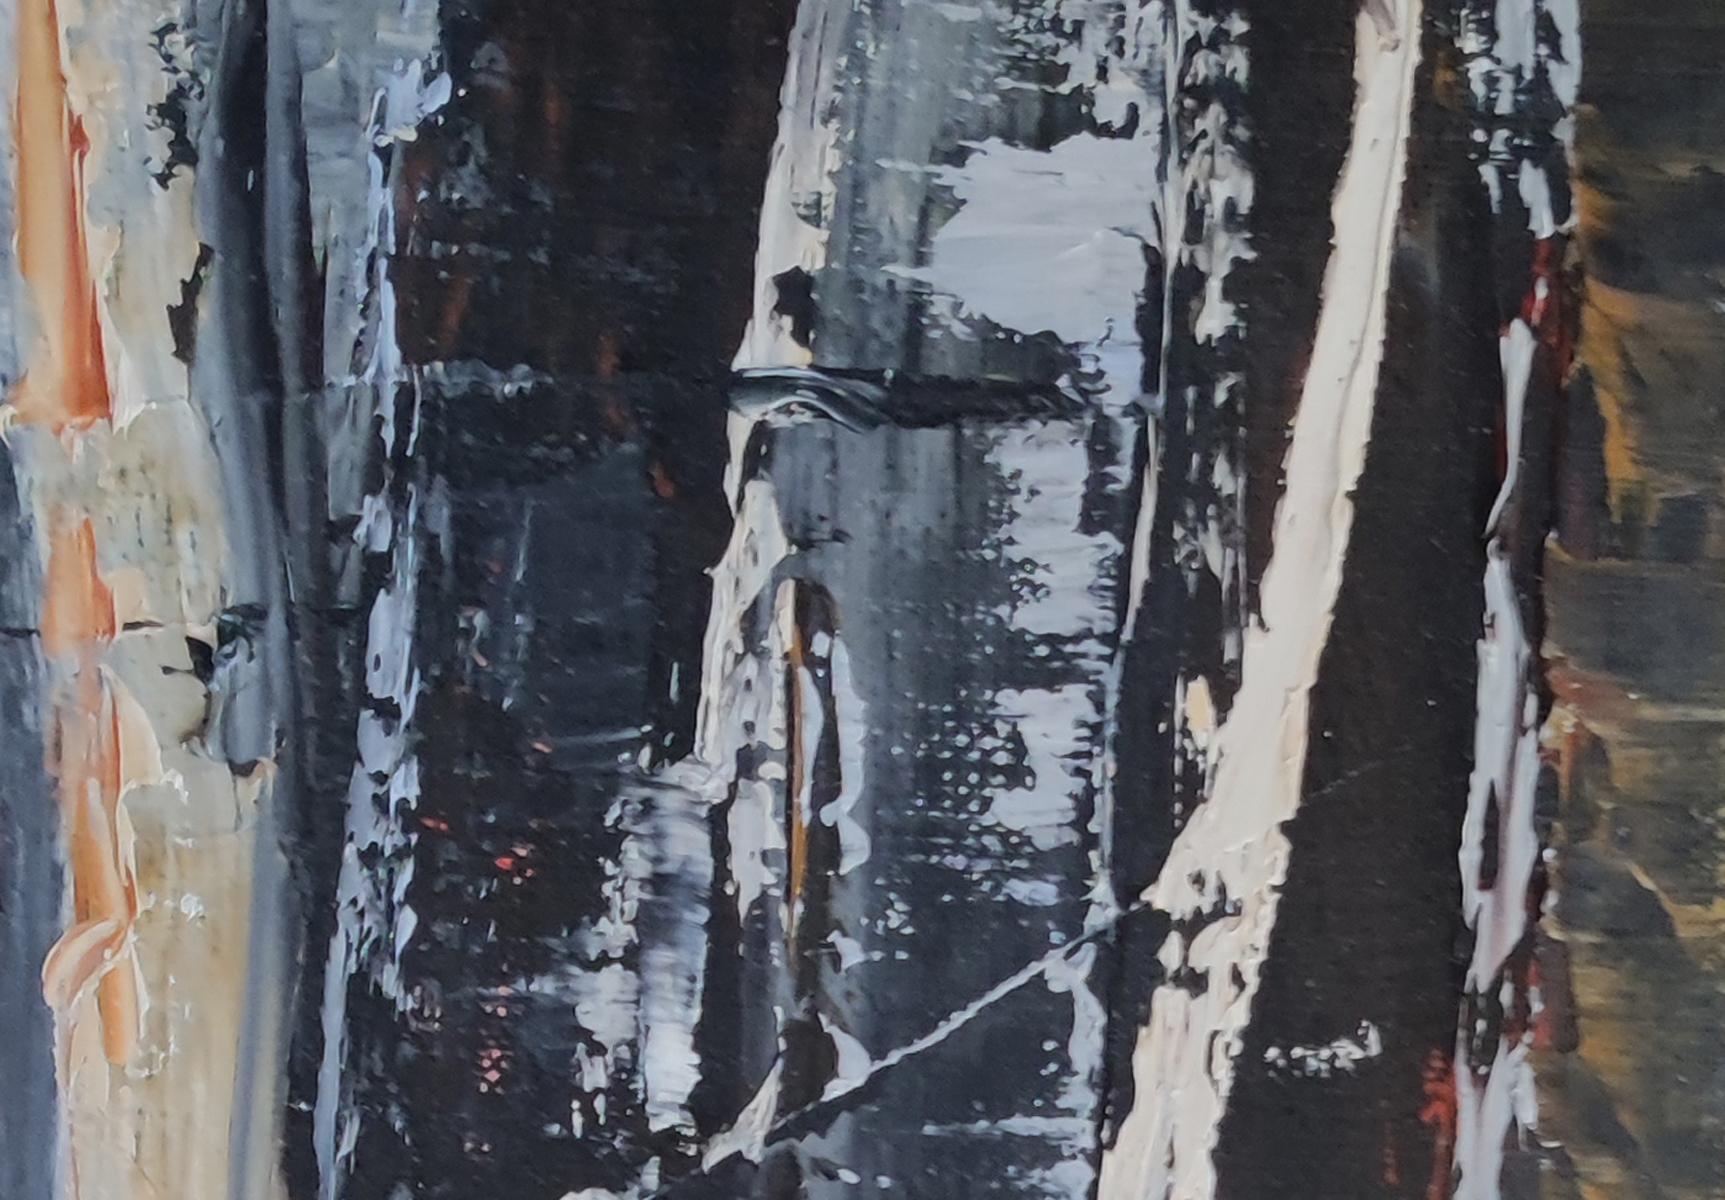 Black trees in a forest in winter.
Painting trunks in matter. oil on canvas worked with a painting knife in multiple layers bringing an interesting texture
 The subject disappears in favor of graphics. The artist aims to bring light out of the dark,